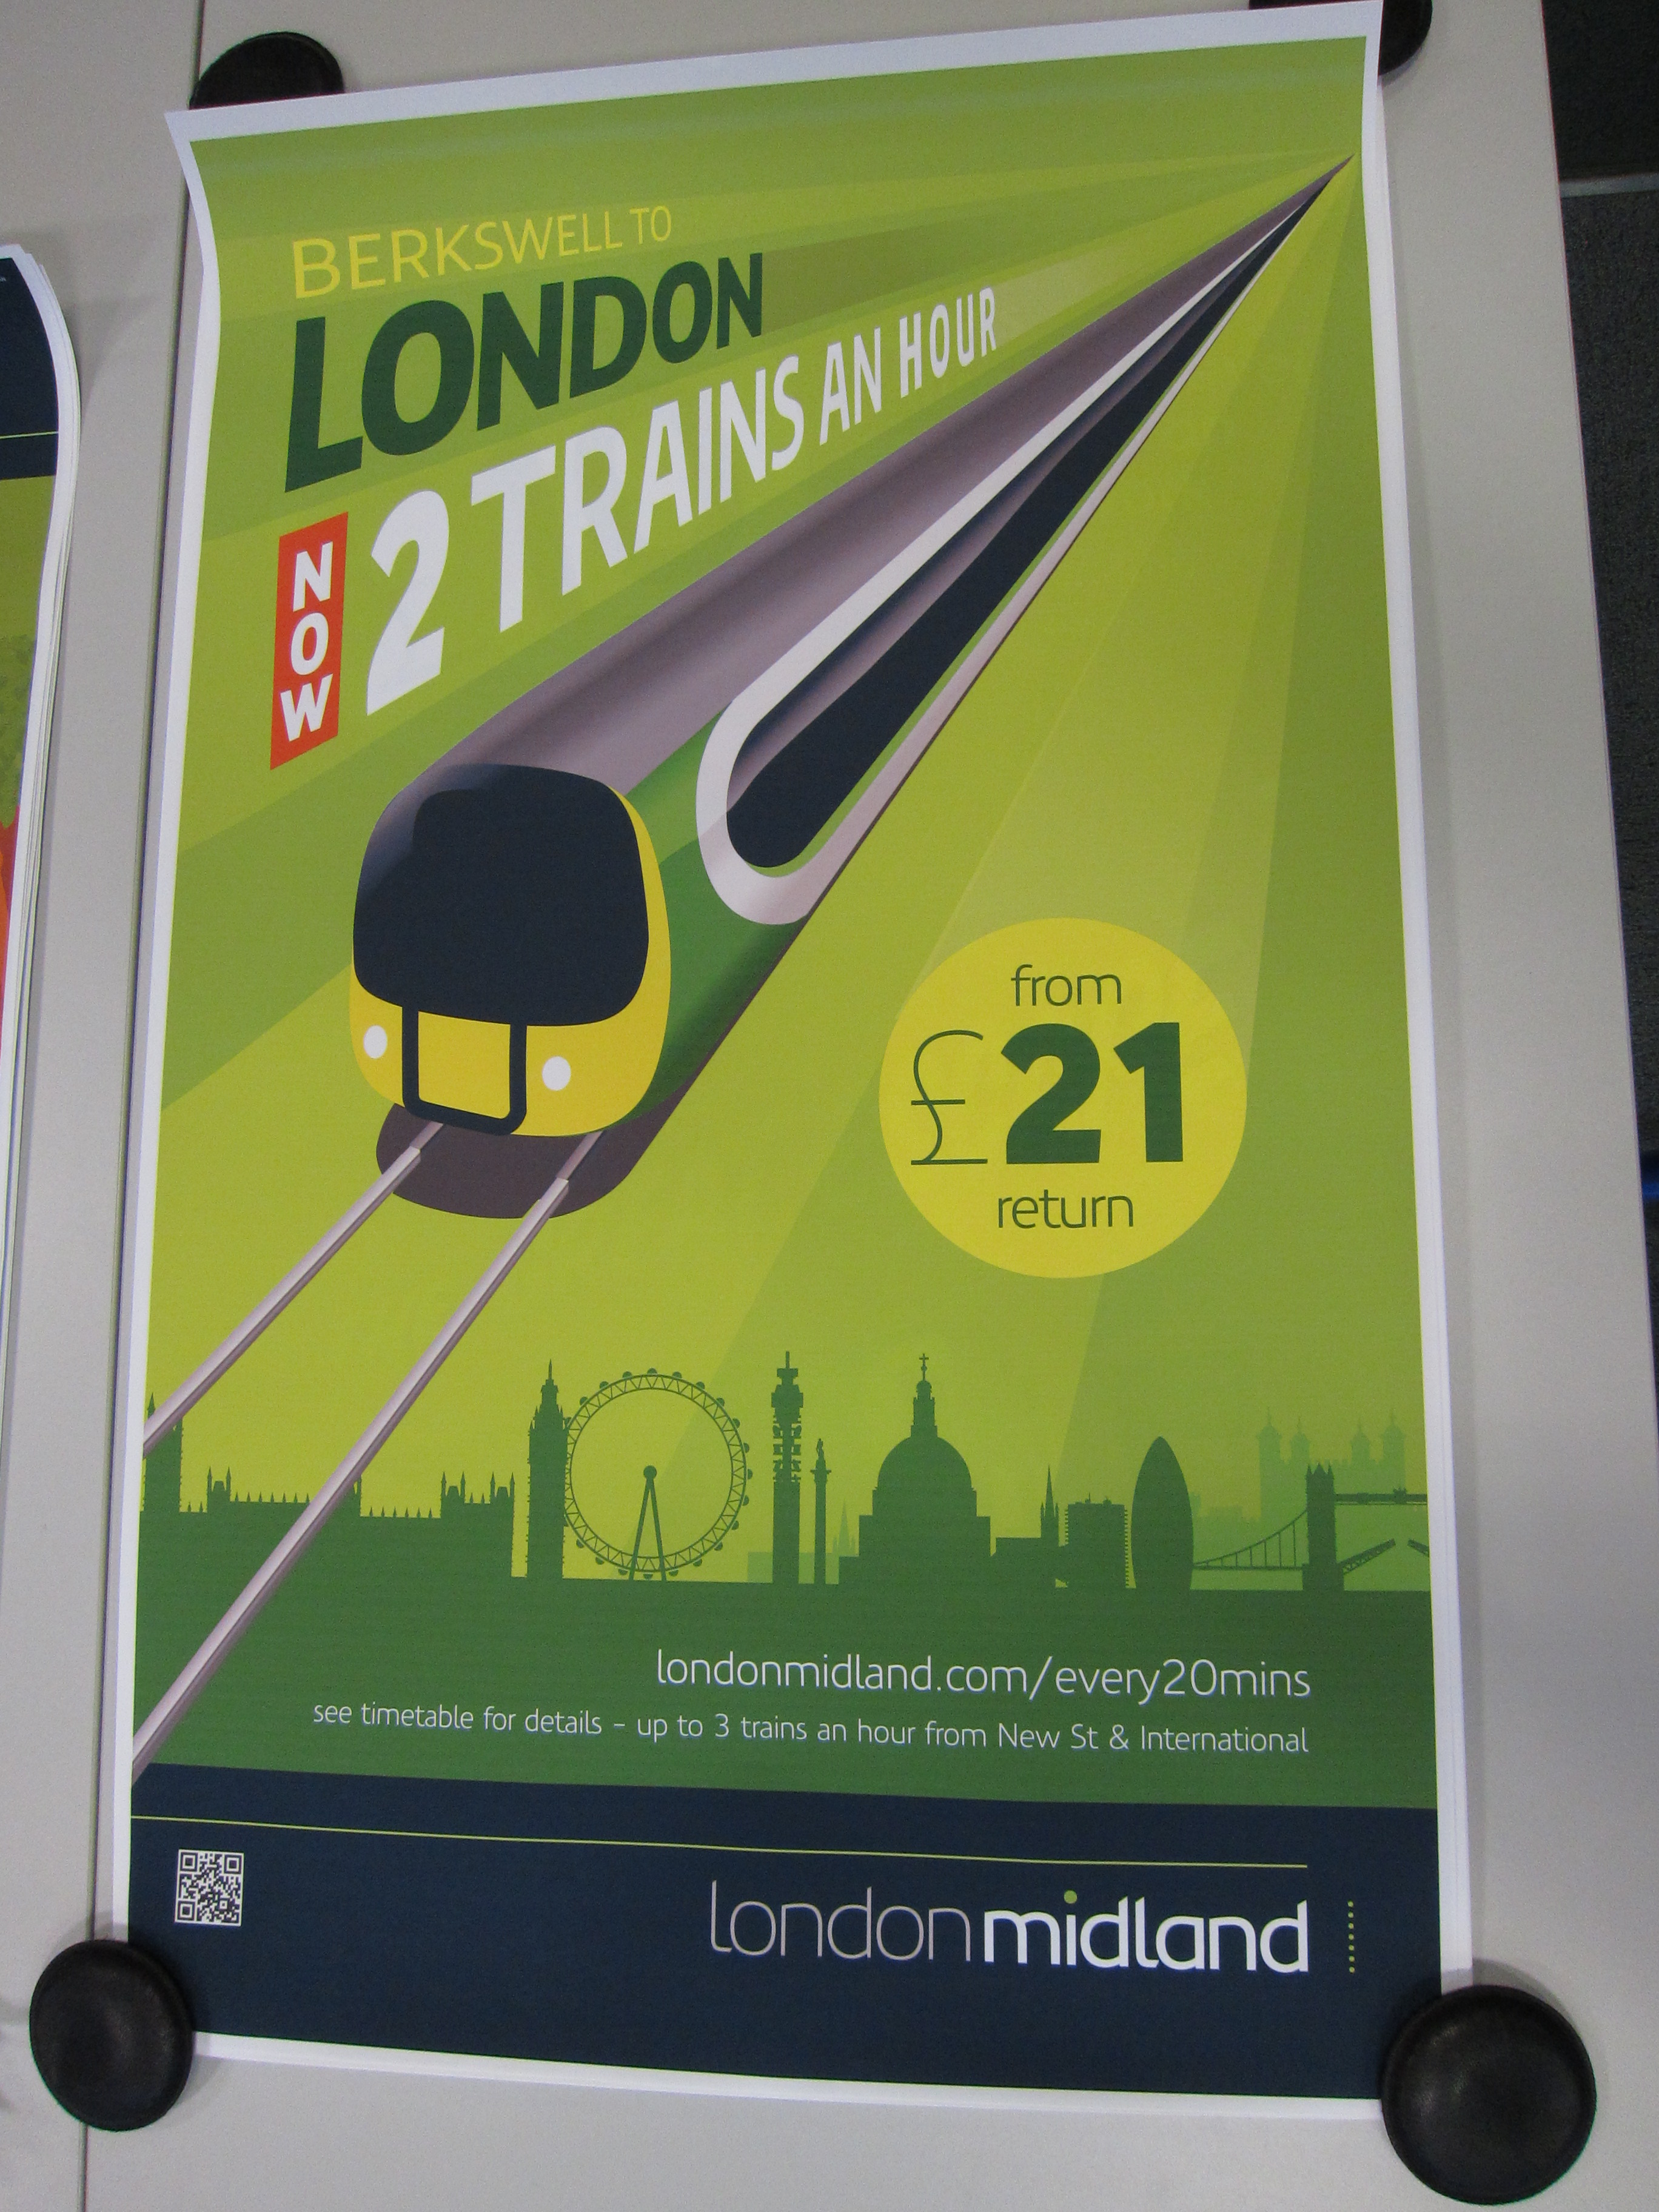 London Midland. Berkswell to London now 2 trains an hour. Autumn 2011